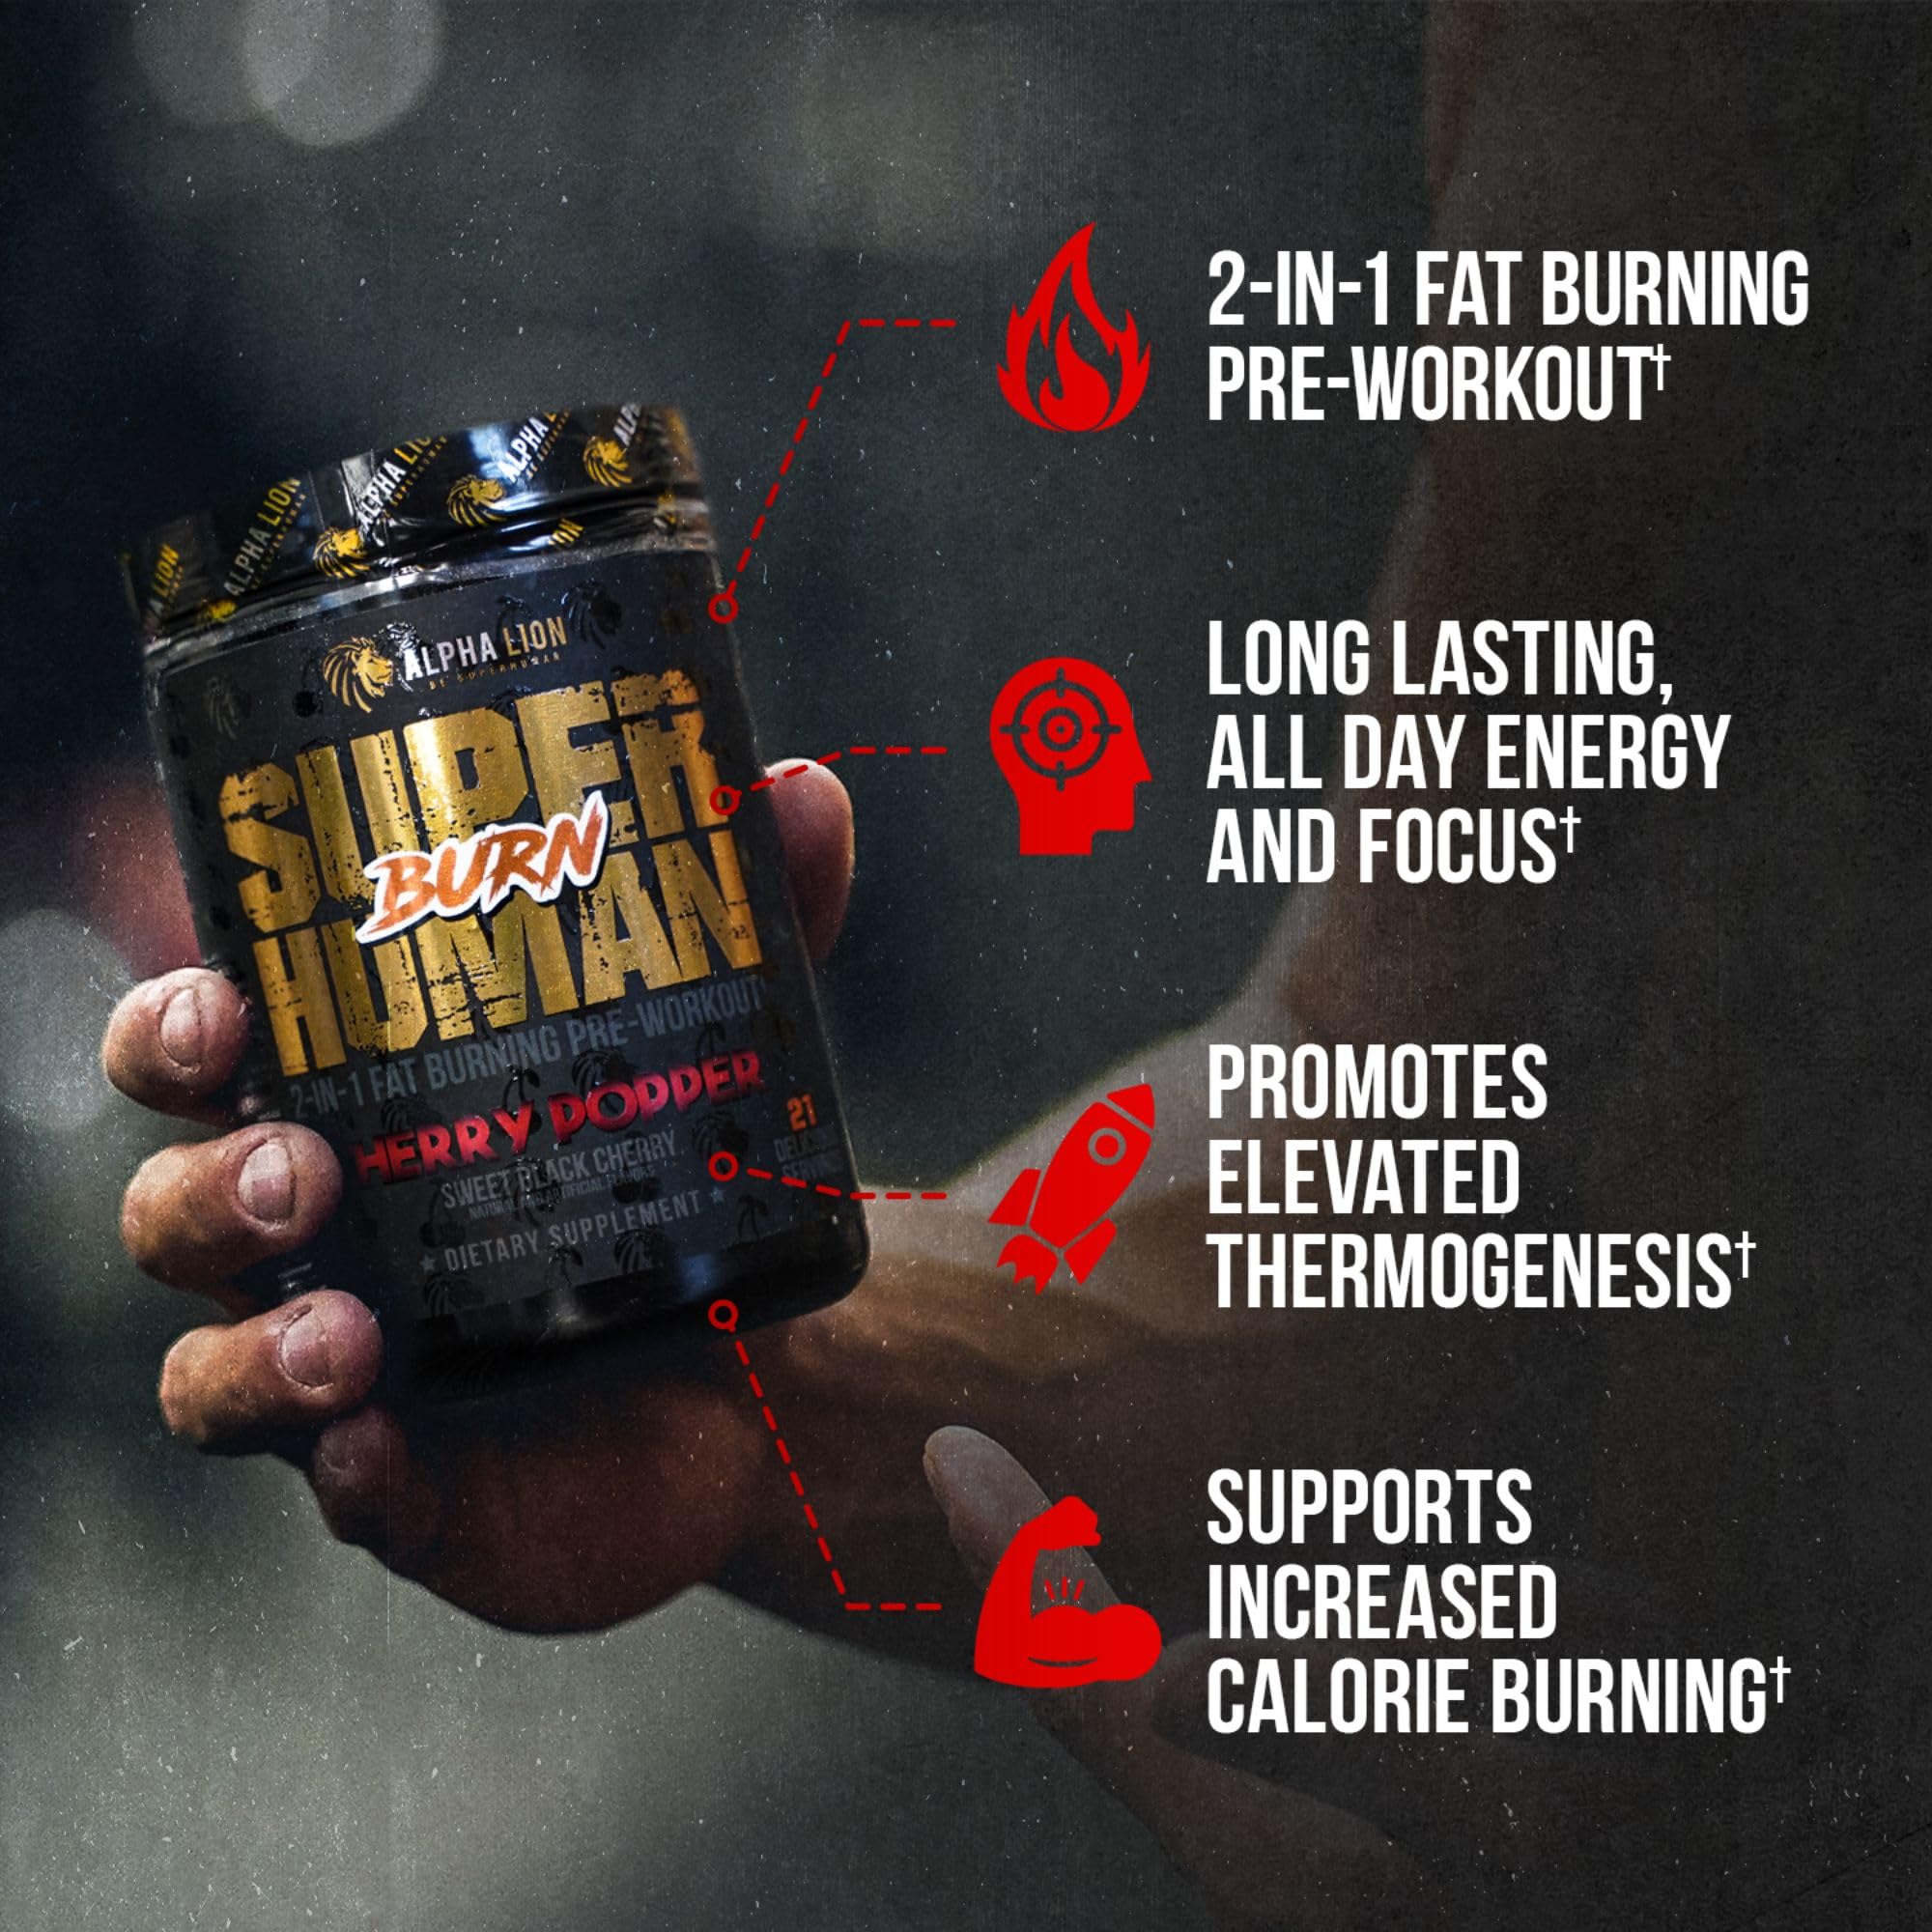 ALPHA LION Superhuman Burn 2-in-1 Metabolism Booster Pre Workout, Weight Loss Supplement, Appetite Suppressant, Fat Loss Support, Energy & Focus Powder (21 Servings, Sweet Black Cherry Flavor)